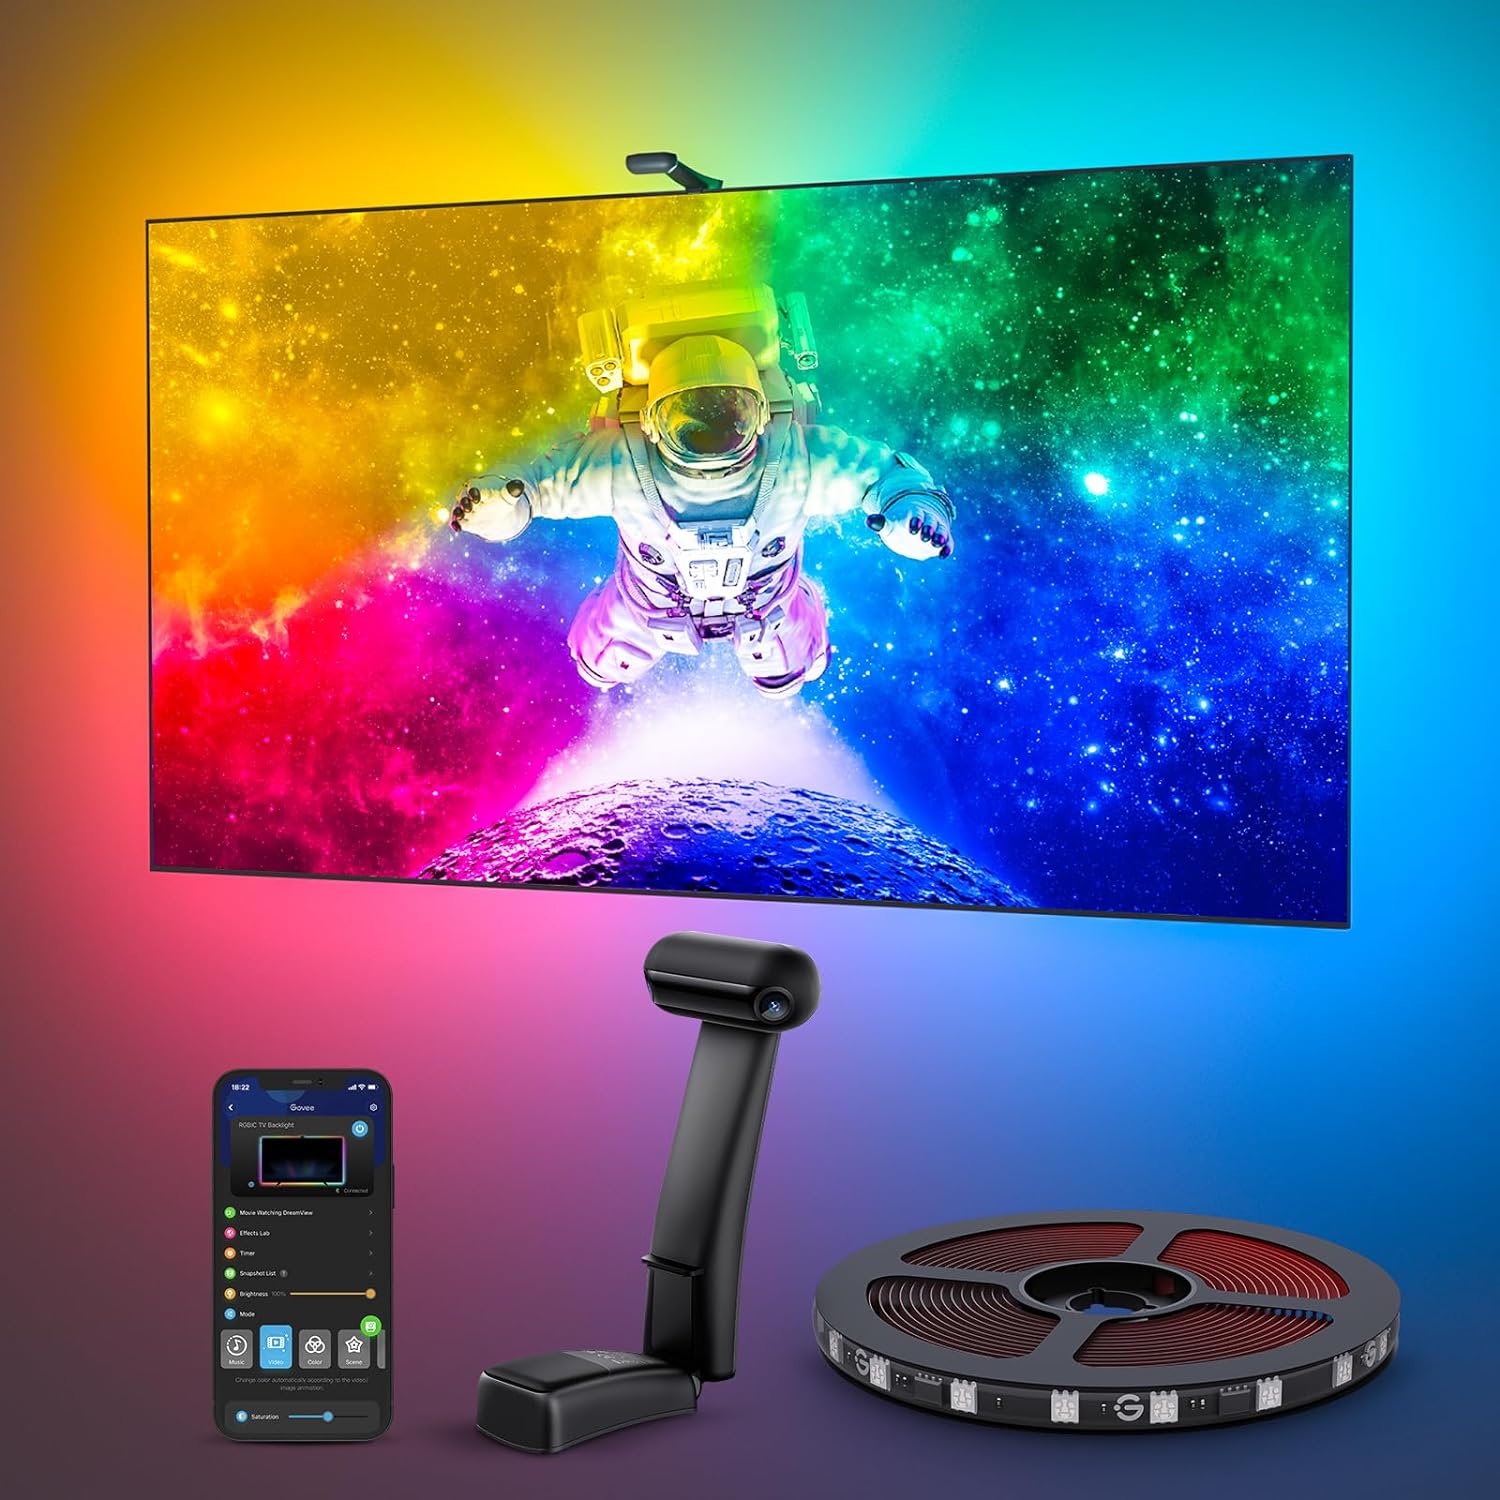 Govee Envisual TV LED Backlight T2 with Dual Cameras, 21ft RGBIC Wi-Fi LED Strip Lights for 98-100 inch TVs, Double Strip Light Beads, Adapts to Ultra-Thin TVs, Smart App Control, Music Sync, H605C